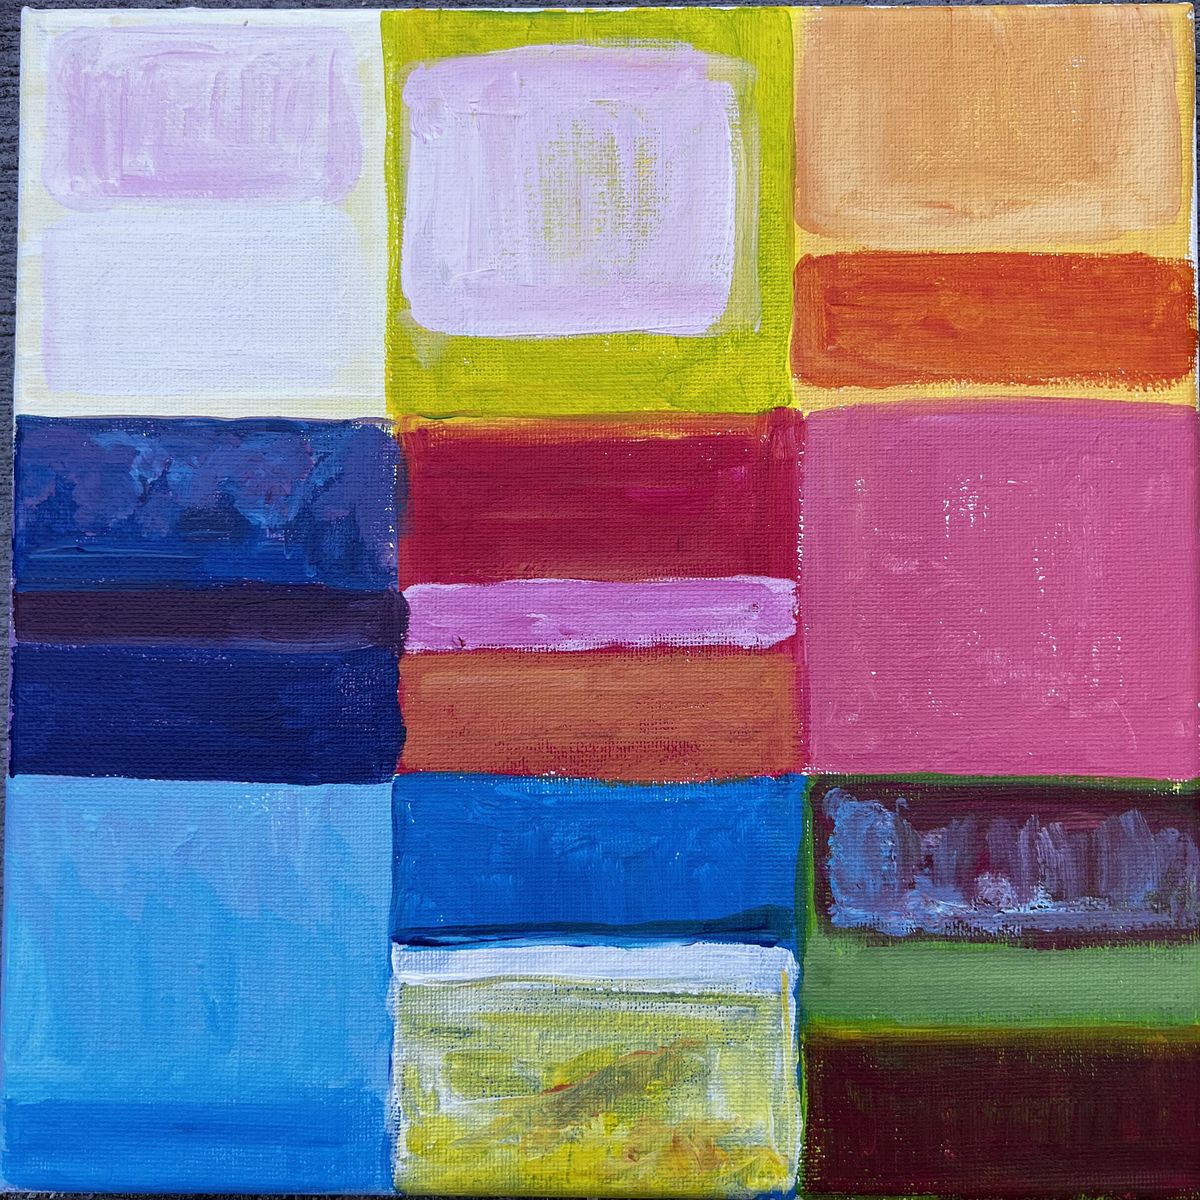 SIP + PAINT :: Rothko-Inspired with Nora Lieberman